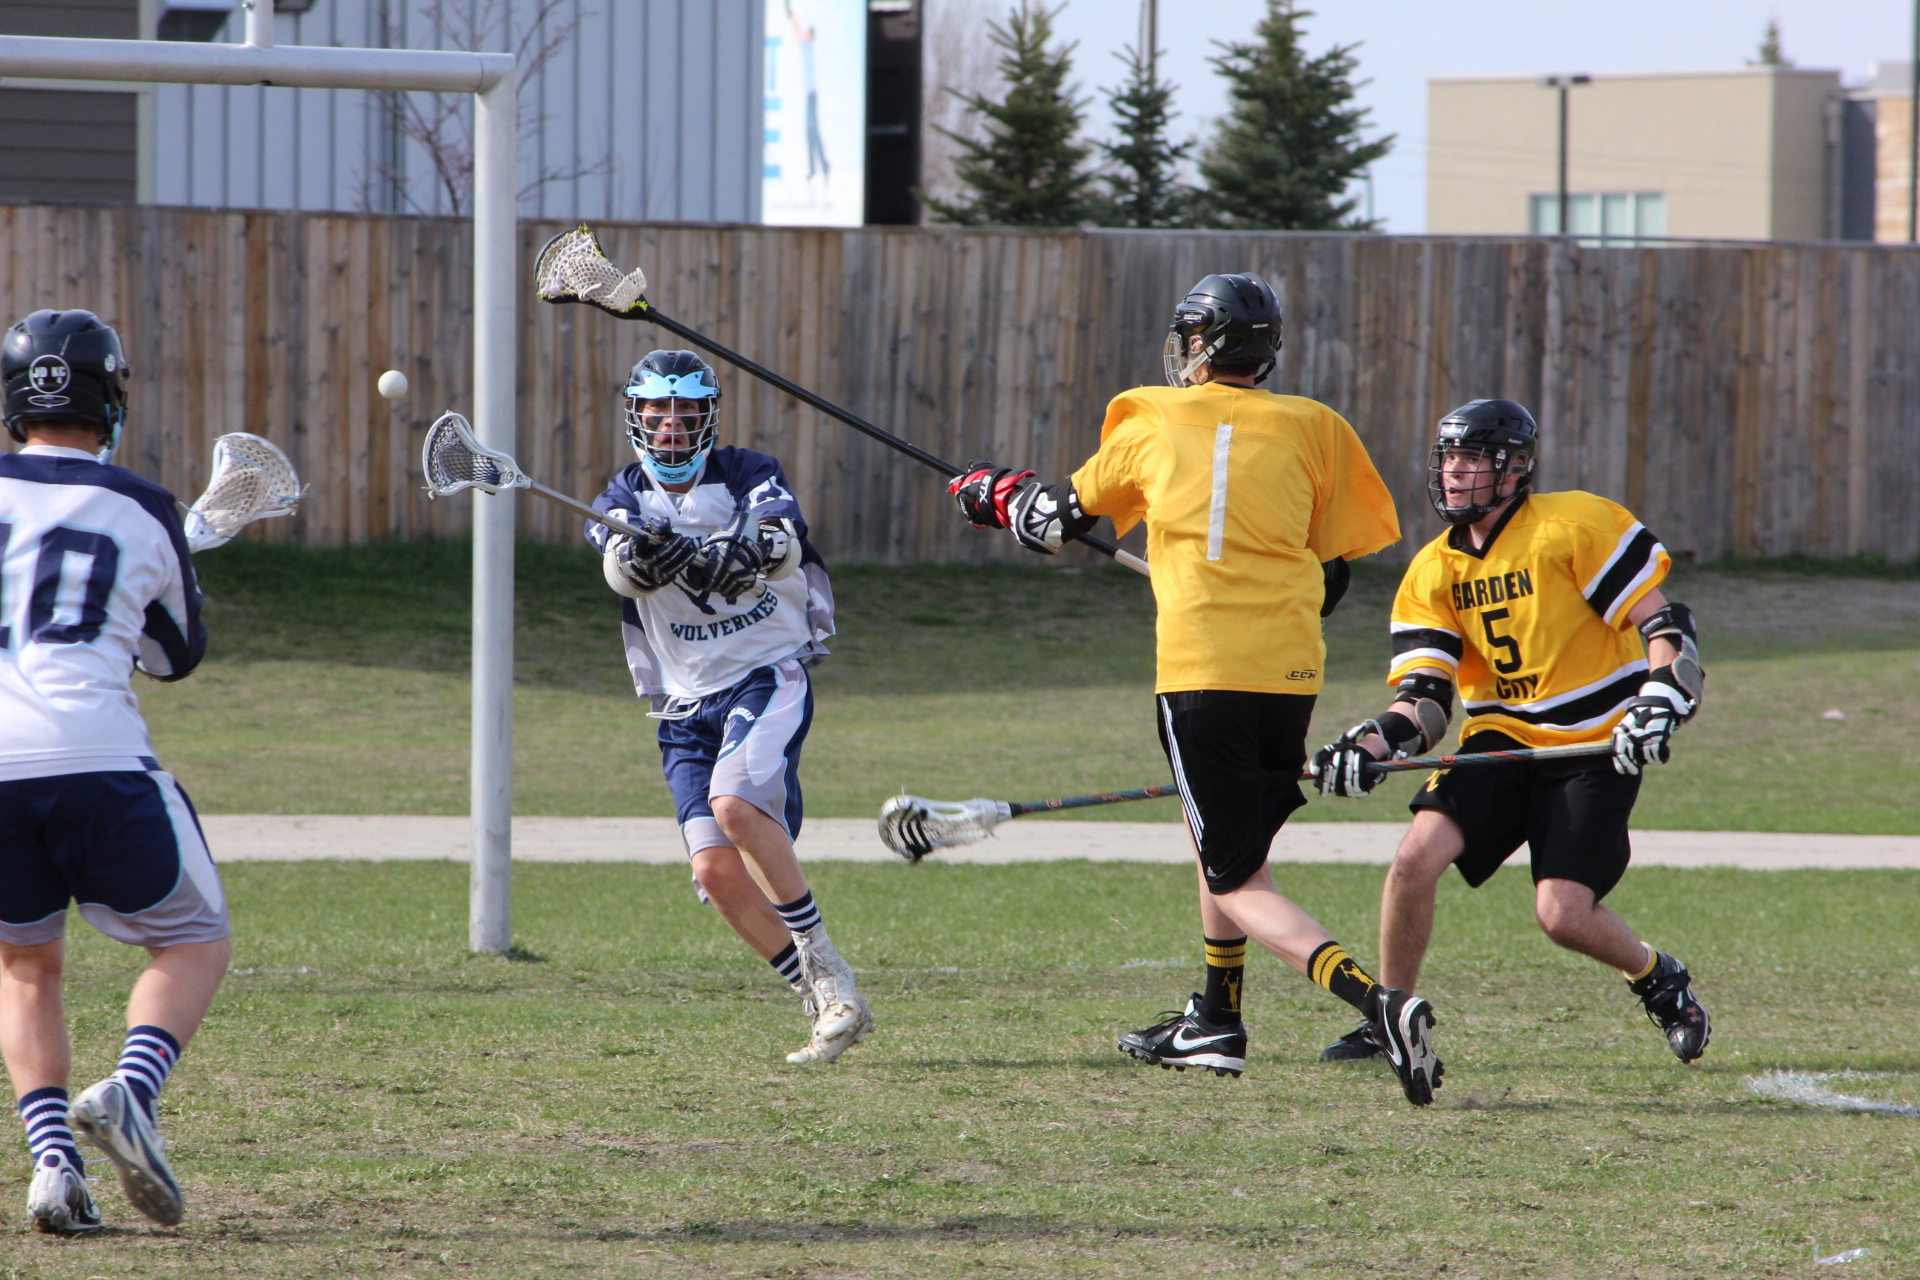 three people in yellow jerseys are playing lacrosse